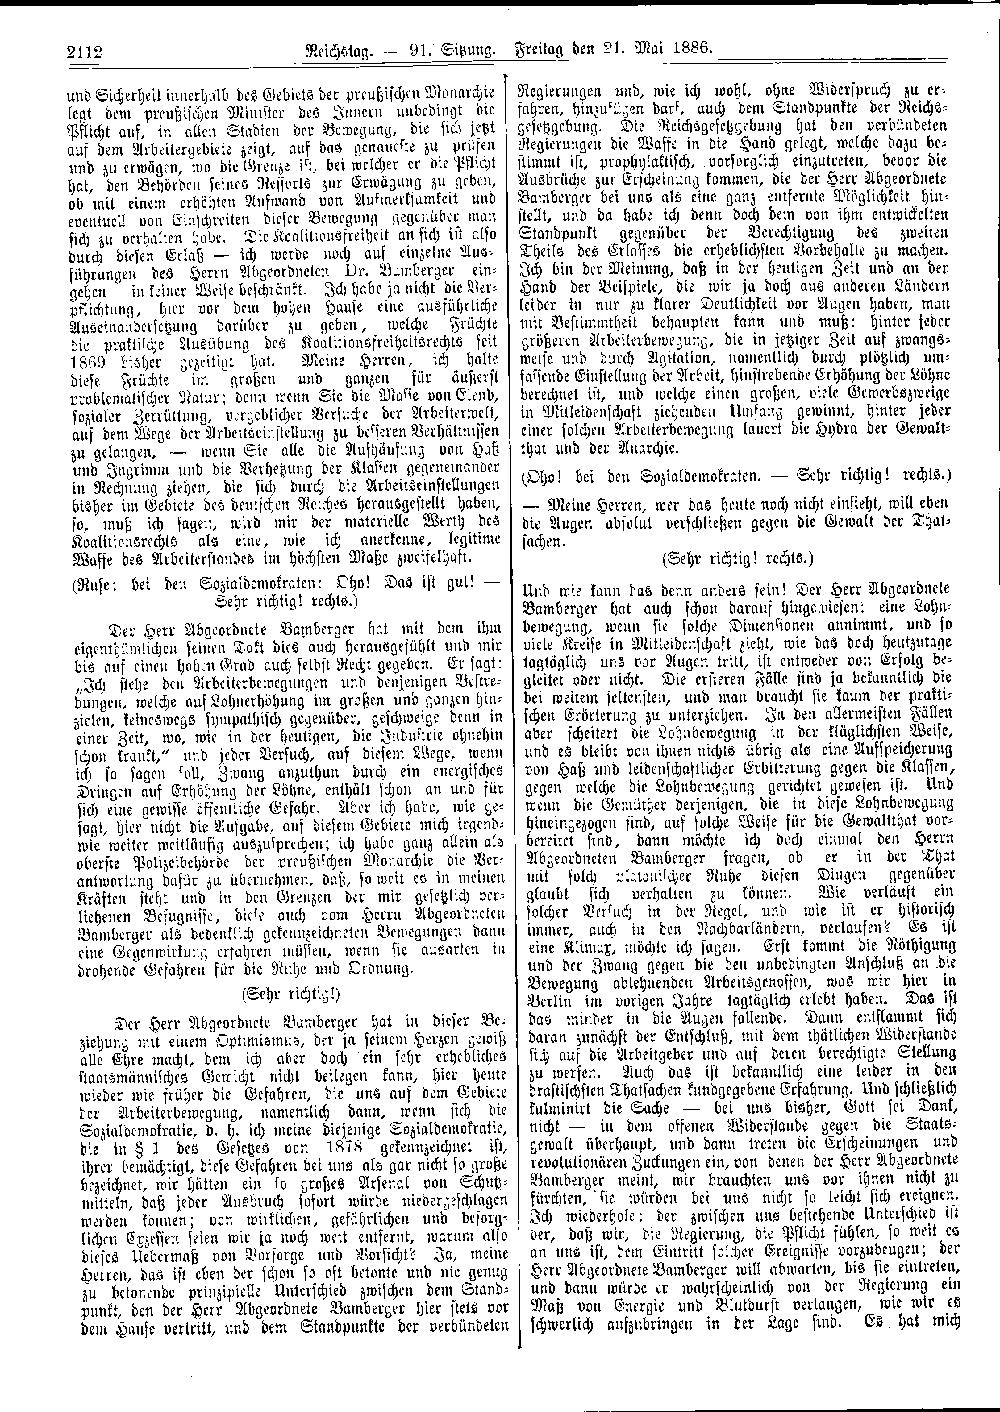 Scan of page 2112